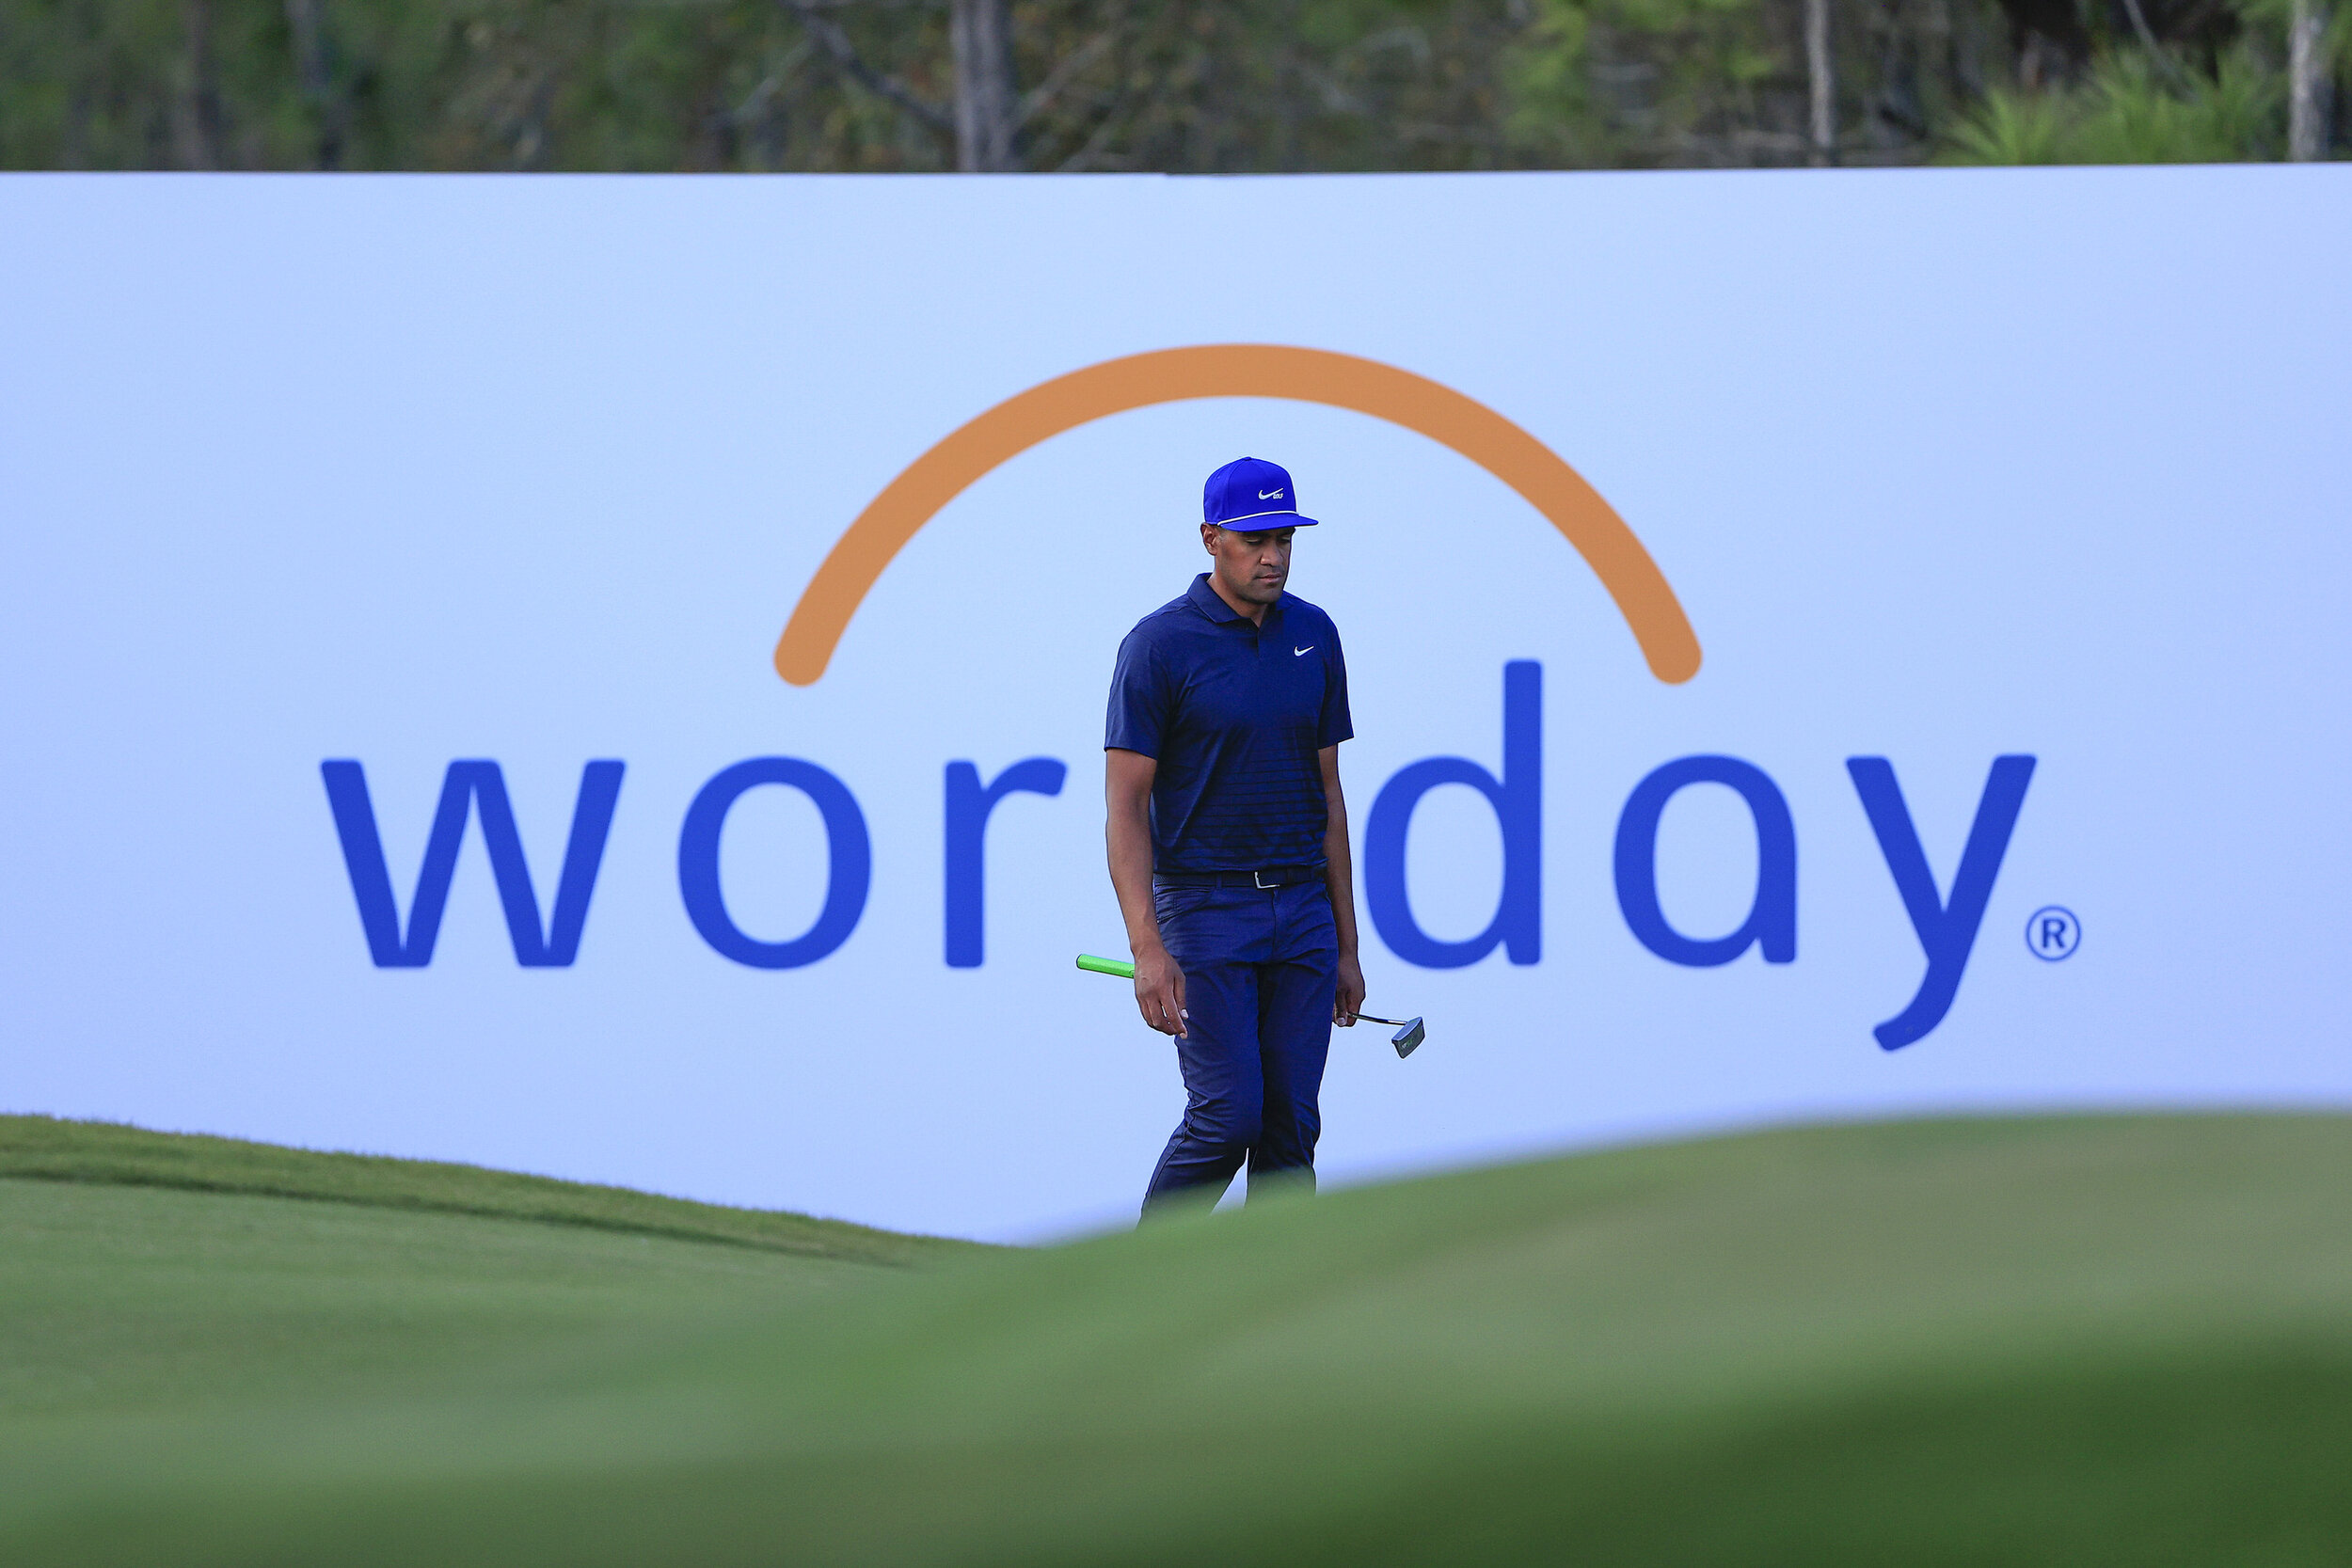  BRADENTON, FLORIDA - FEBRUARY 27: Tony Finau of the United States walks the 14th hole during the third round of the World Golf Championships-Workday Championship at The Concession on February 27, 2021 in Bradenton, Florida. (Photo by Sam Greenwood/G